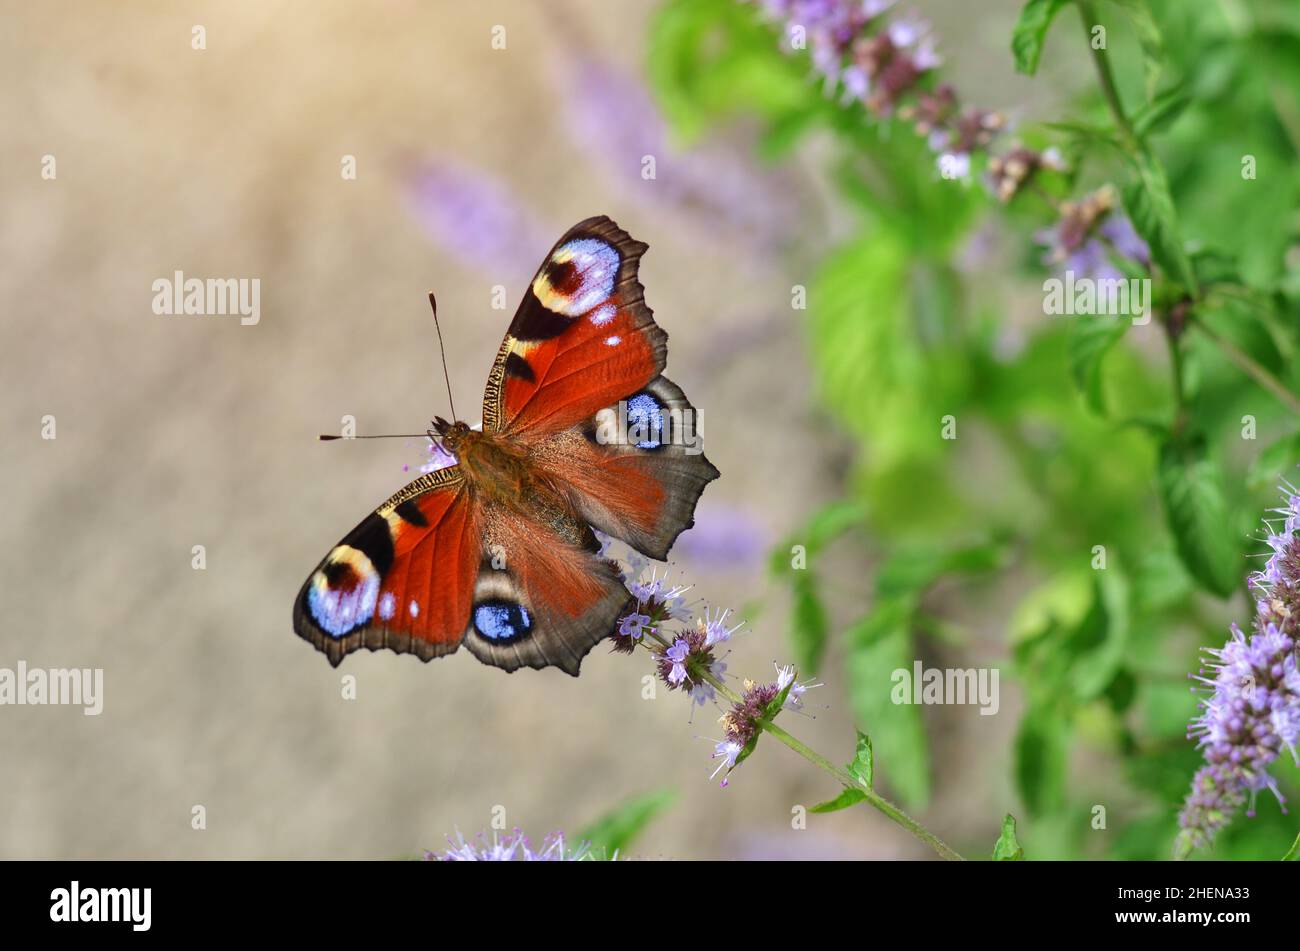 Aglais io, known simply as the peacock butterfly or European peacock, is a butterfly species belonging to the family Nymphalidae. Stock Photo